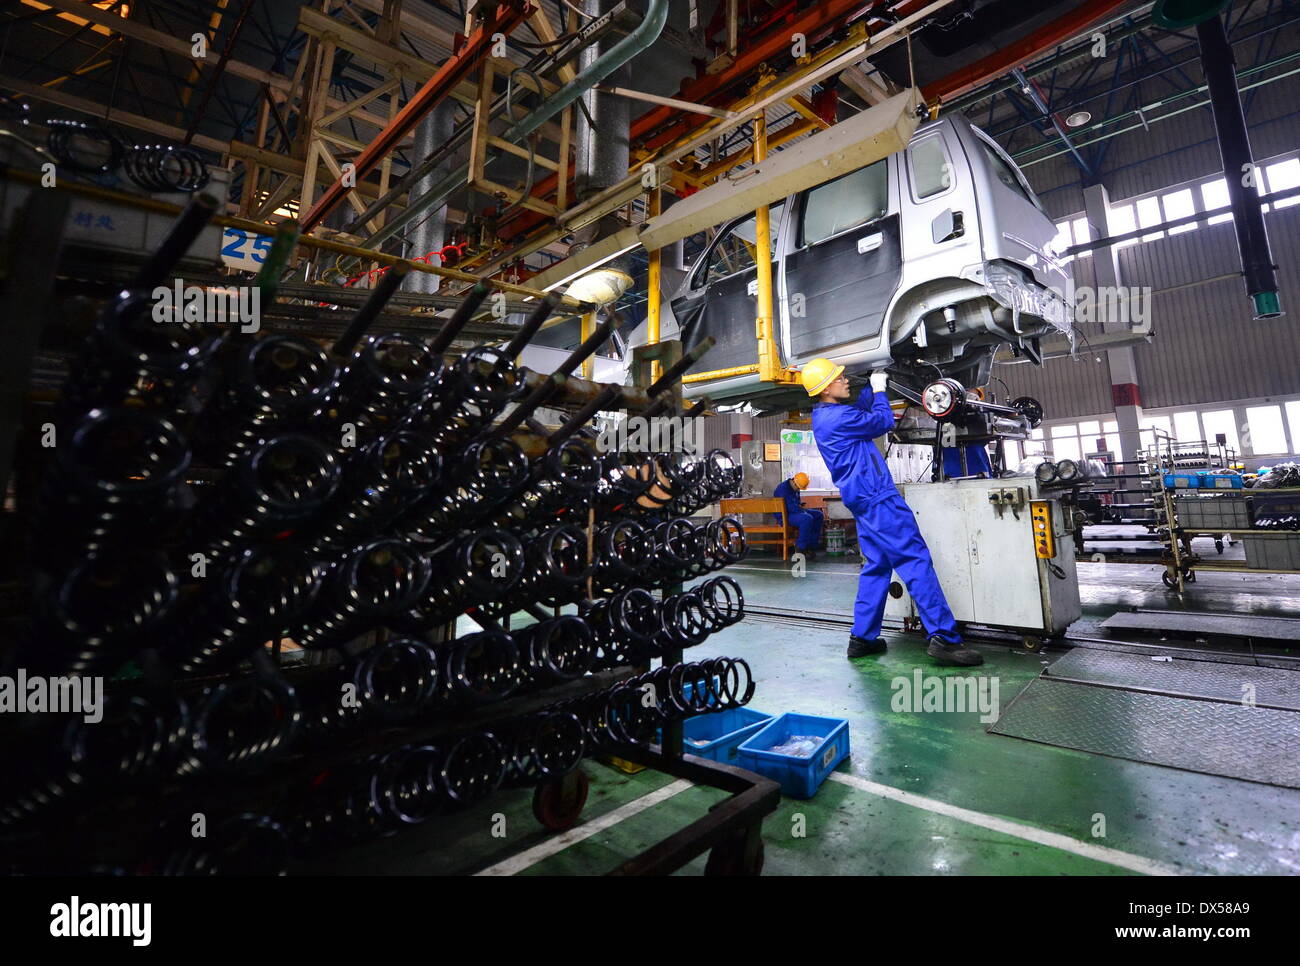 Nanchang, China. 18 March 2014. A worker works on an assembly line in Changhe Automobile Co. in east China's Jiangxi Province, March 12, 2014. In 2013, Beijing Automotive Group (BAIC), China's fifth-largest auto maker by sales, signed an agreement to pay about 80 million yuan (13 million U.S. dollars) for a 70-percent stake in Changhe Auto. The Jiangxi-based automaker expects to expand its yield capacity to 180,000 units in 2014, rising 60 percent year-on-year. © Xinhua/Alamy Live News Stock Photo